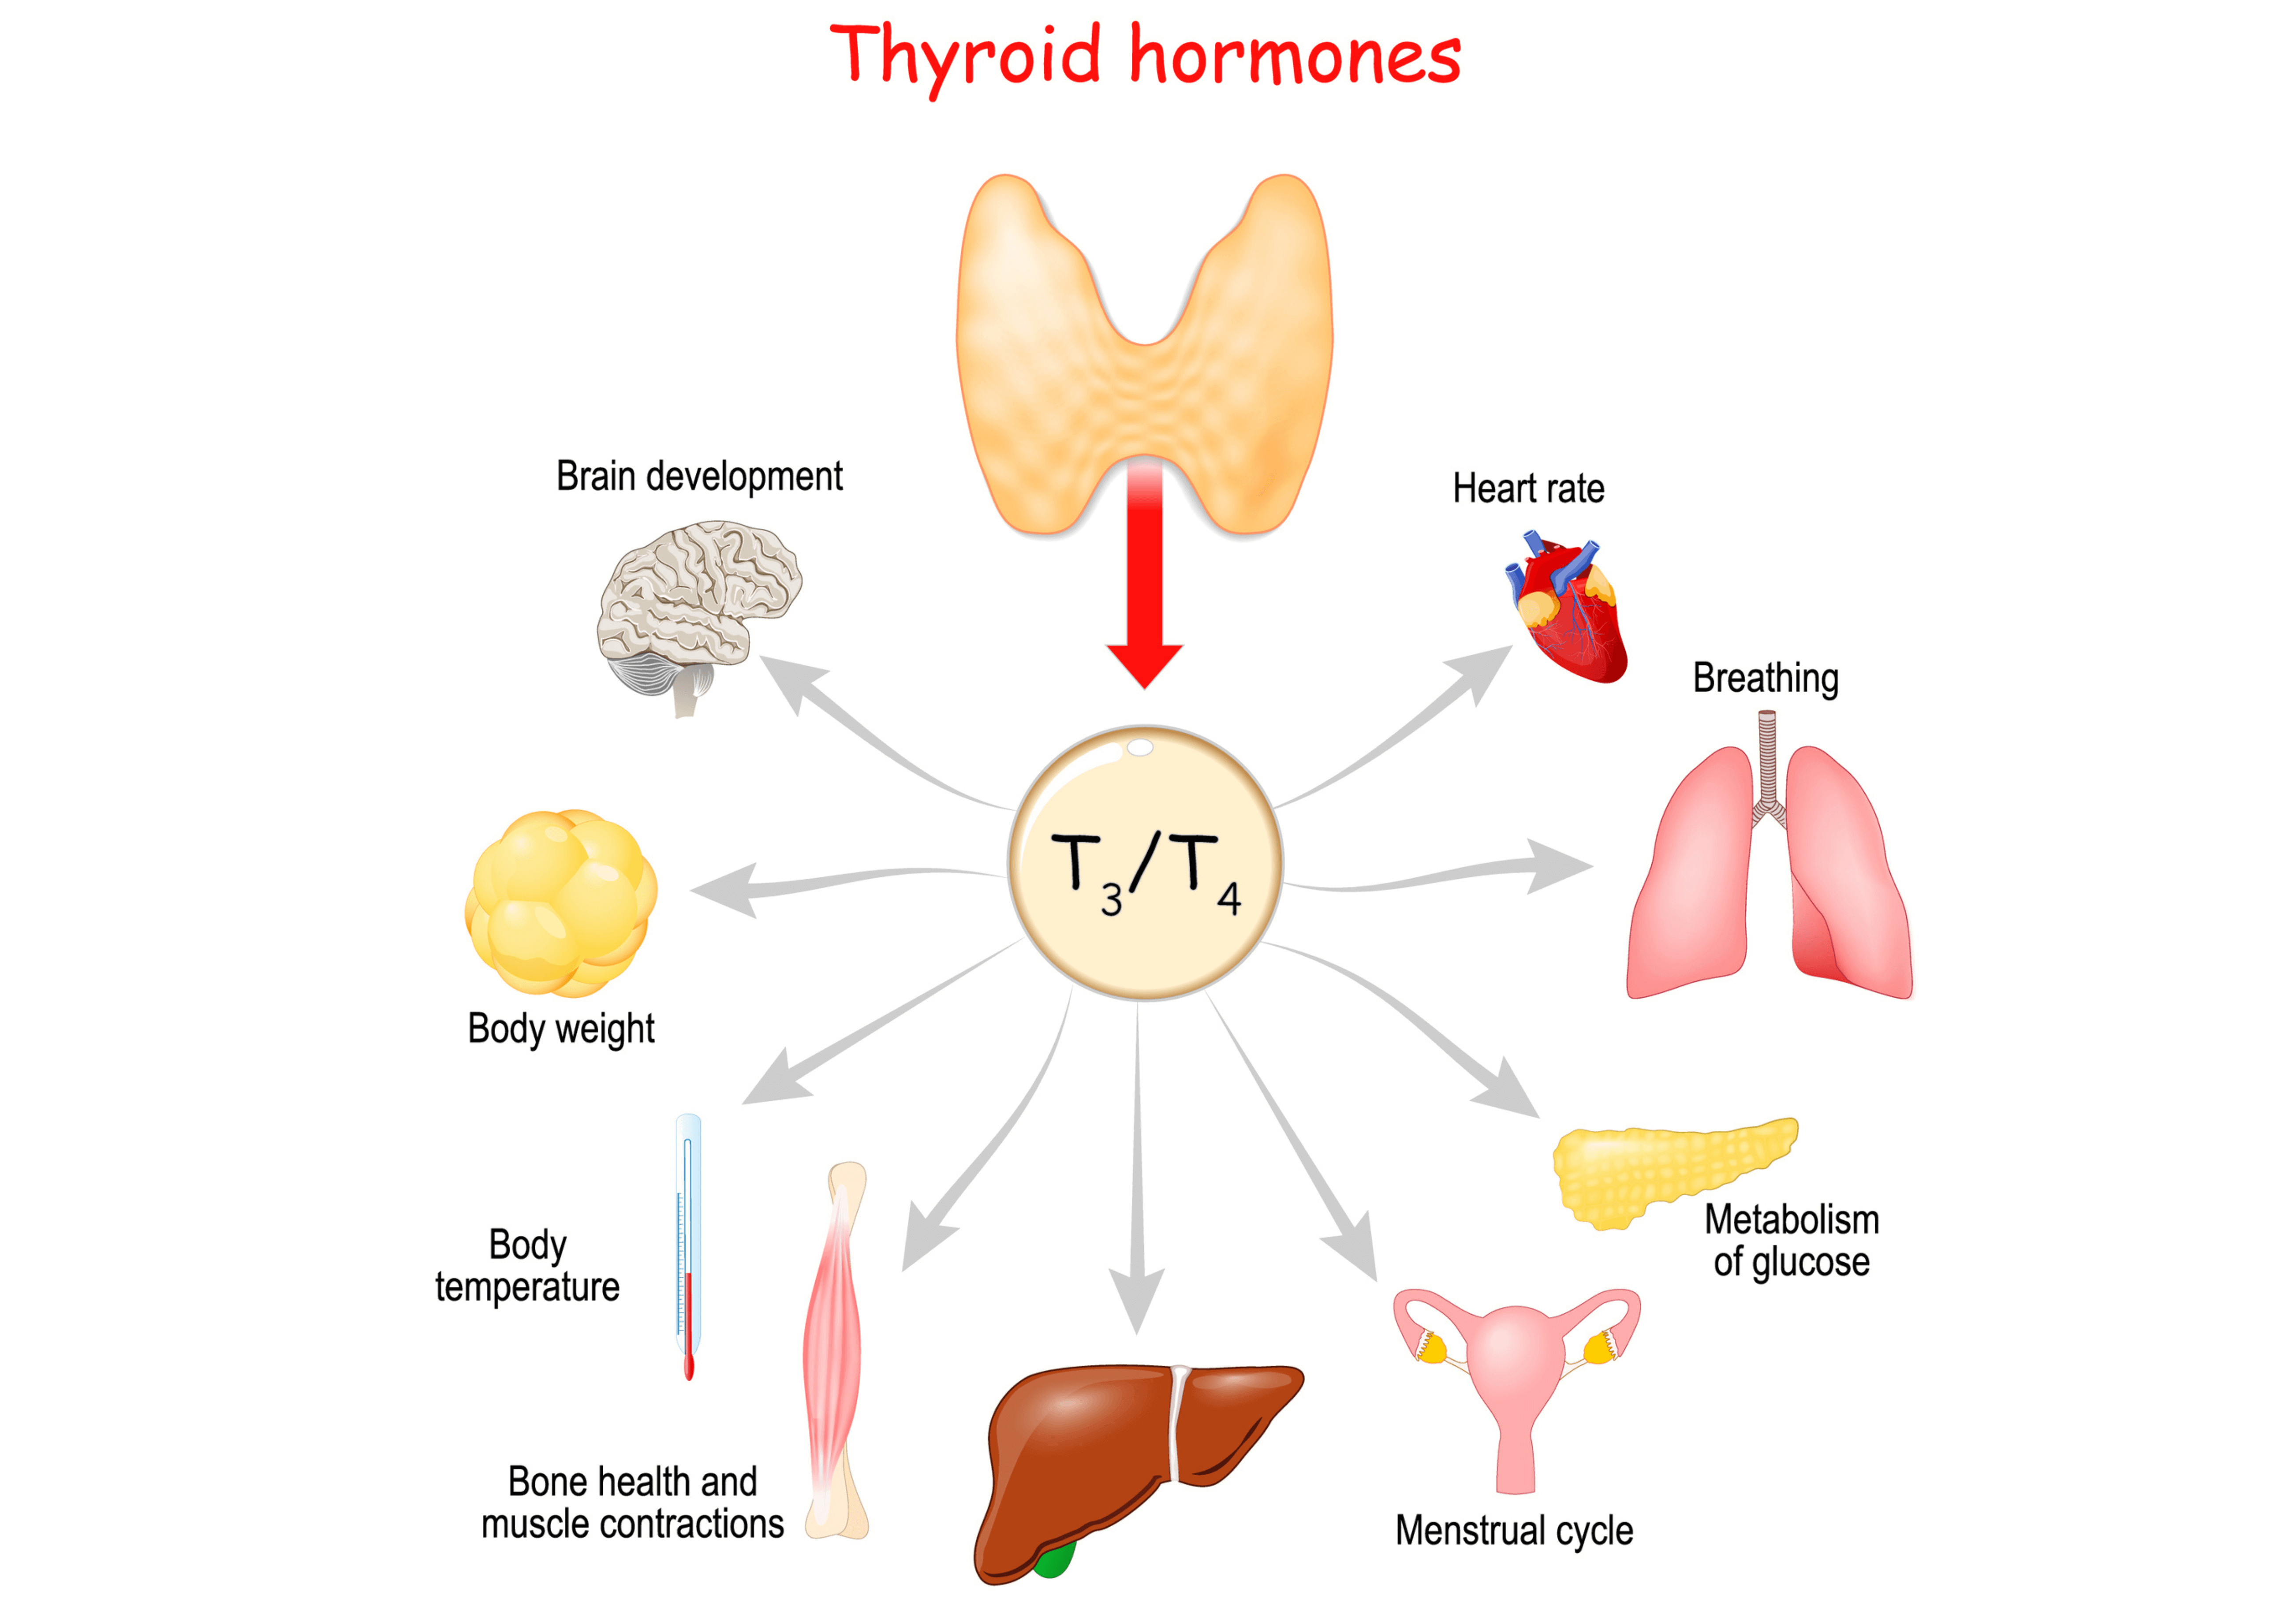 Diagram depicting the role of the thyroid and thyroid hormones, including metabolism and body weight.